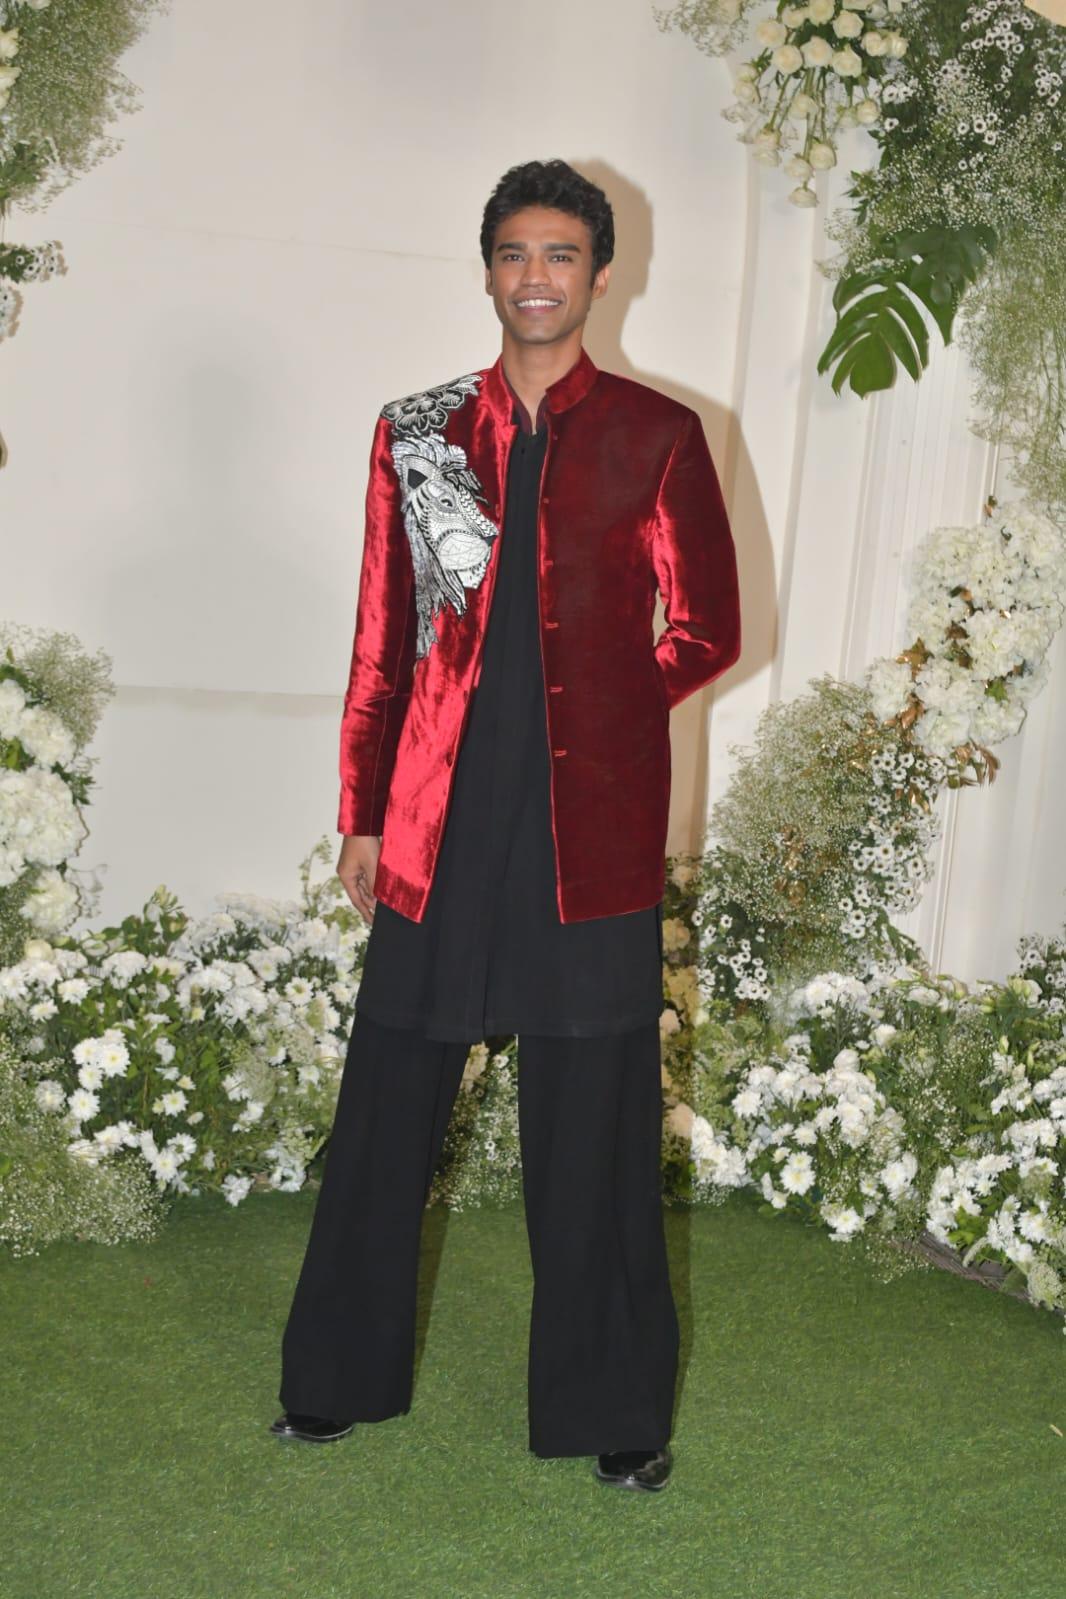 Babil Khan wore an all-black outfit and paired it with a stunning red velvet jacket